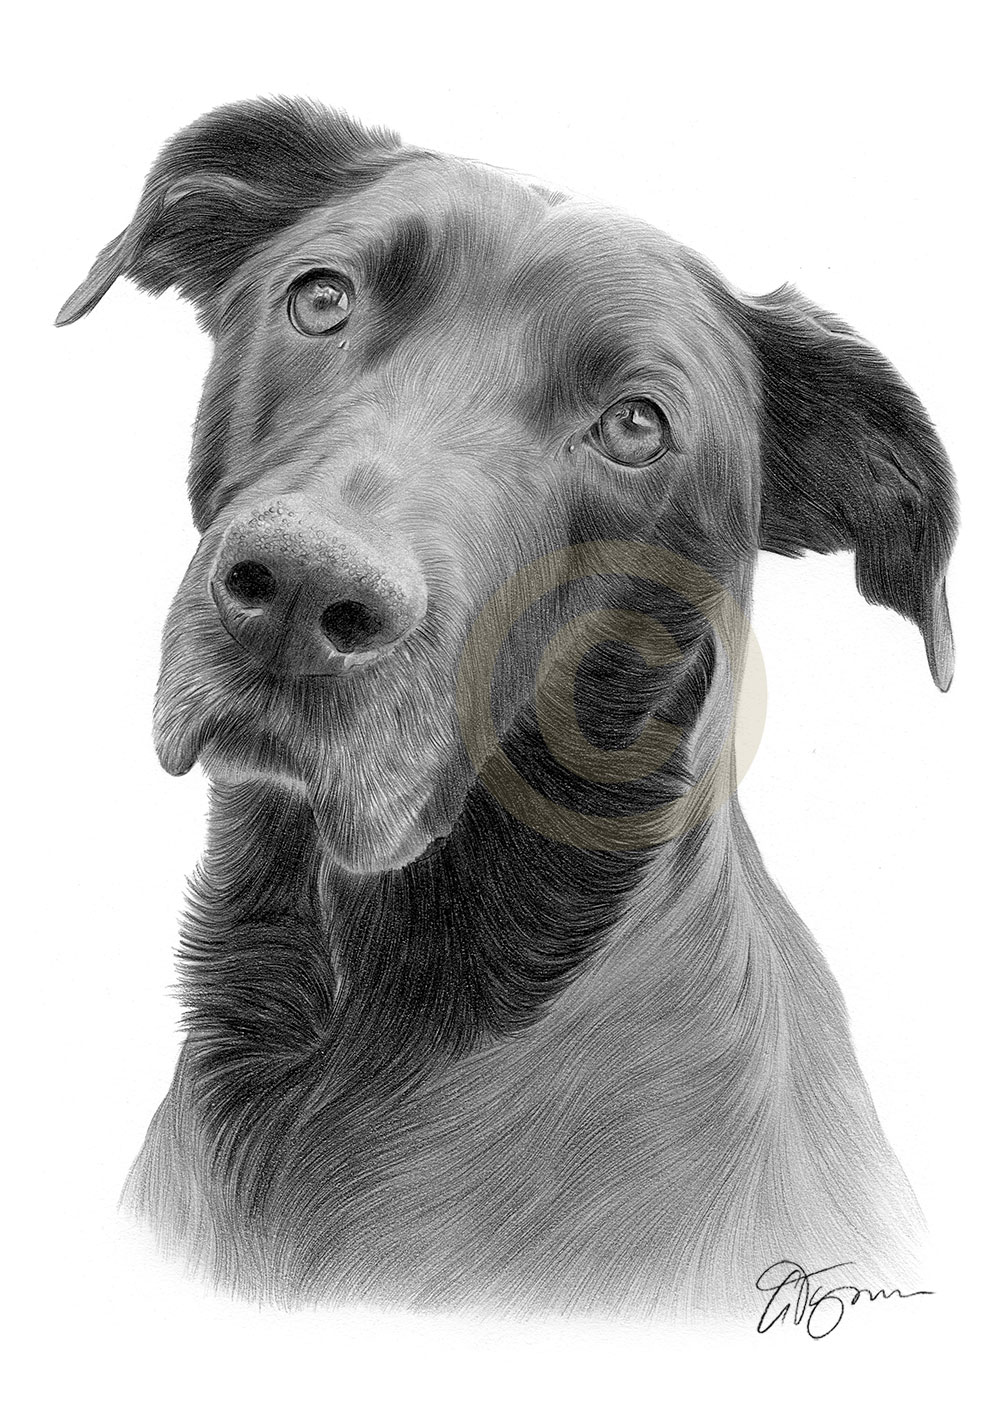 Pencil drawing commission of a rescue dog called Raikan by artist Gary Tymon